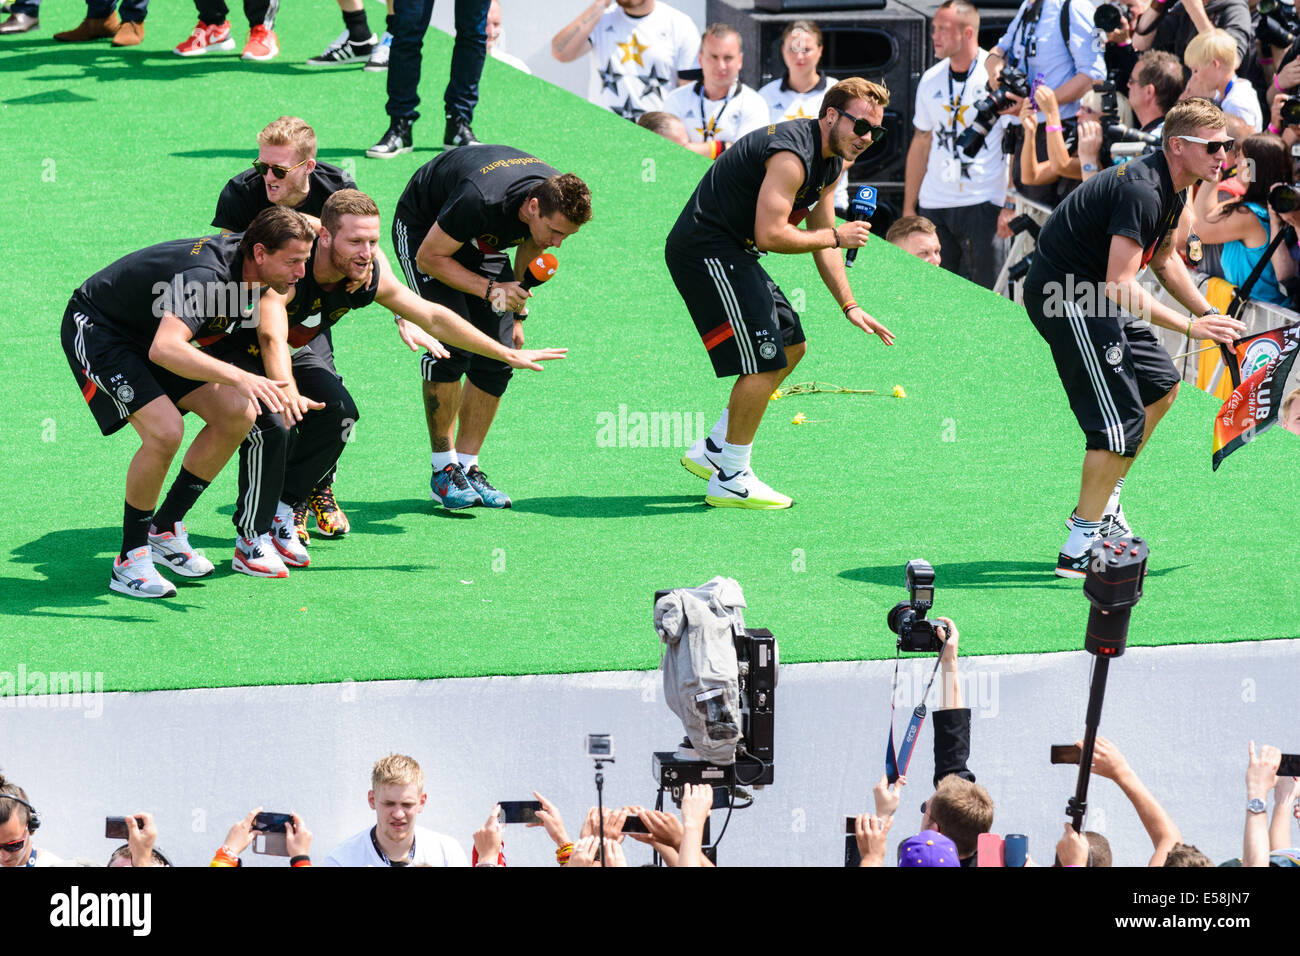 Berlin, Germany. 15th July, 2014. Mario Goetze, Andre Schund Miroslav Klose during the reception for the German national team at the so-called 'Fan Meile' at Brandenburg Gate in Berlin, Germany, 15 July 2014. The German team won the Brazilian 2014 FIFA Soccer World Cup final against Argentina © Action Plus Sports/Alamy Live News Stock Photo